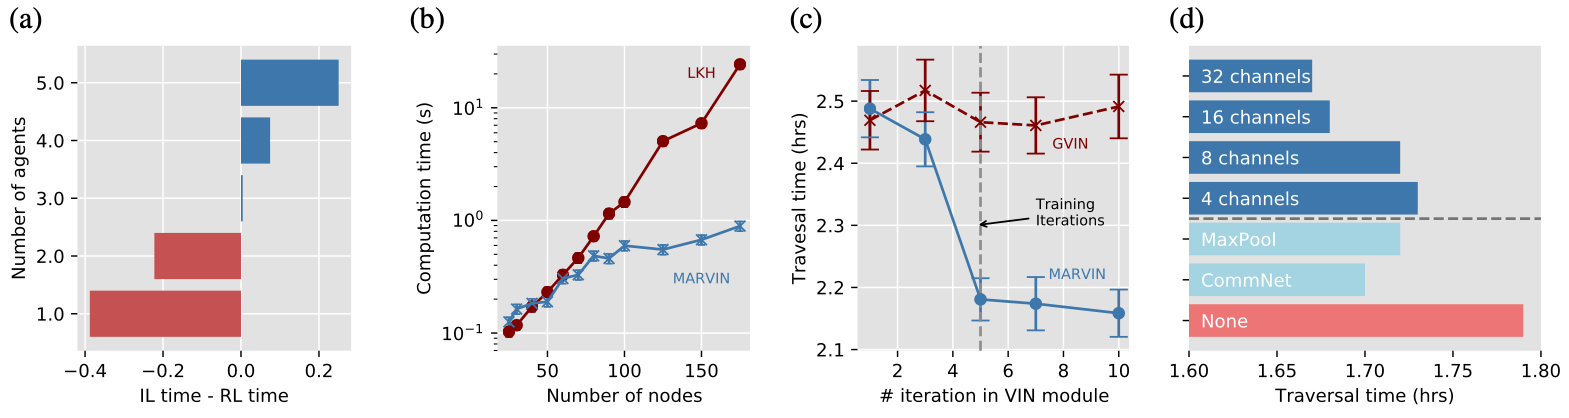  Comparison of imitation learning and reinforcement learning on different number of agents;
